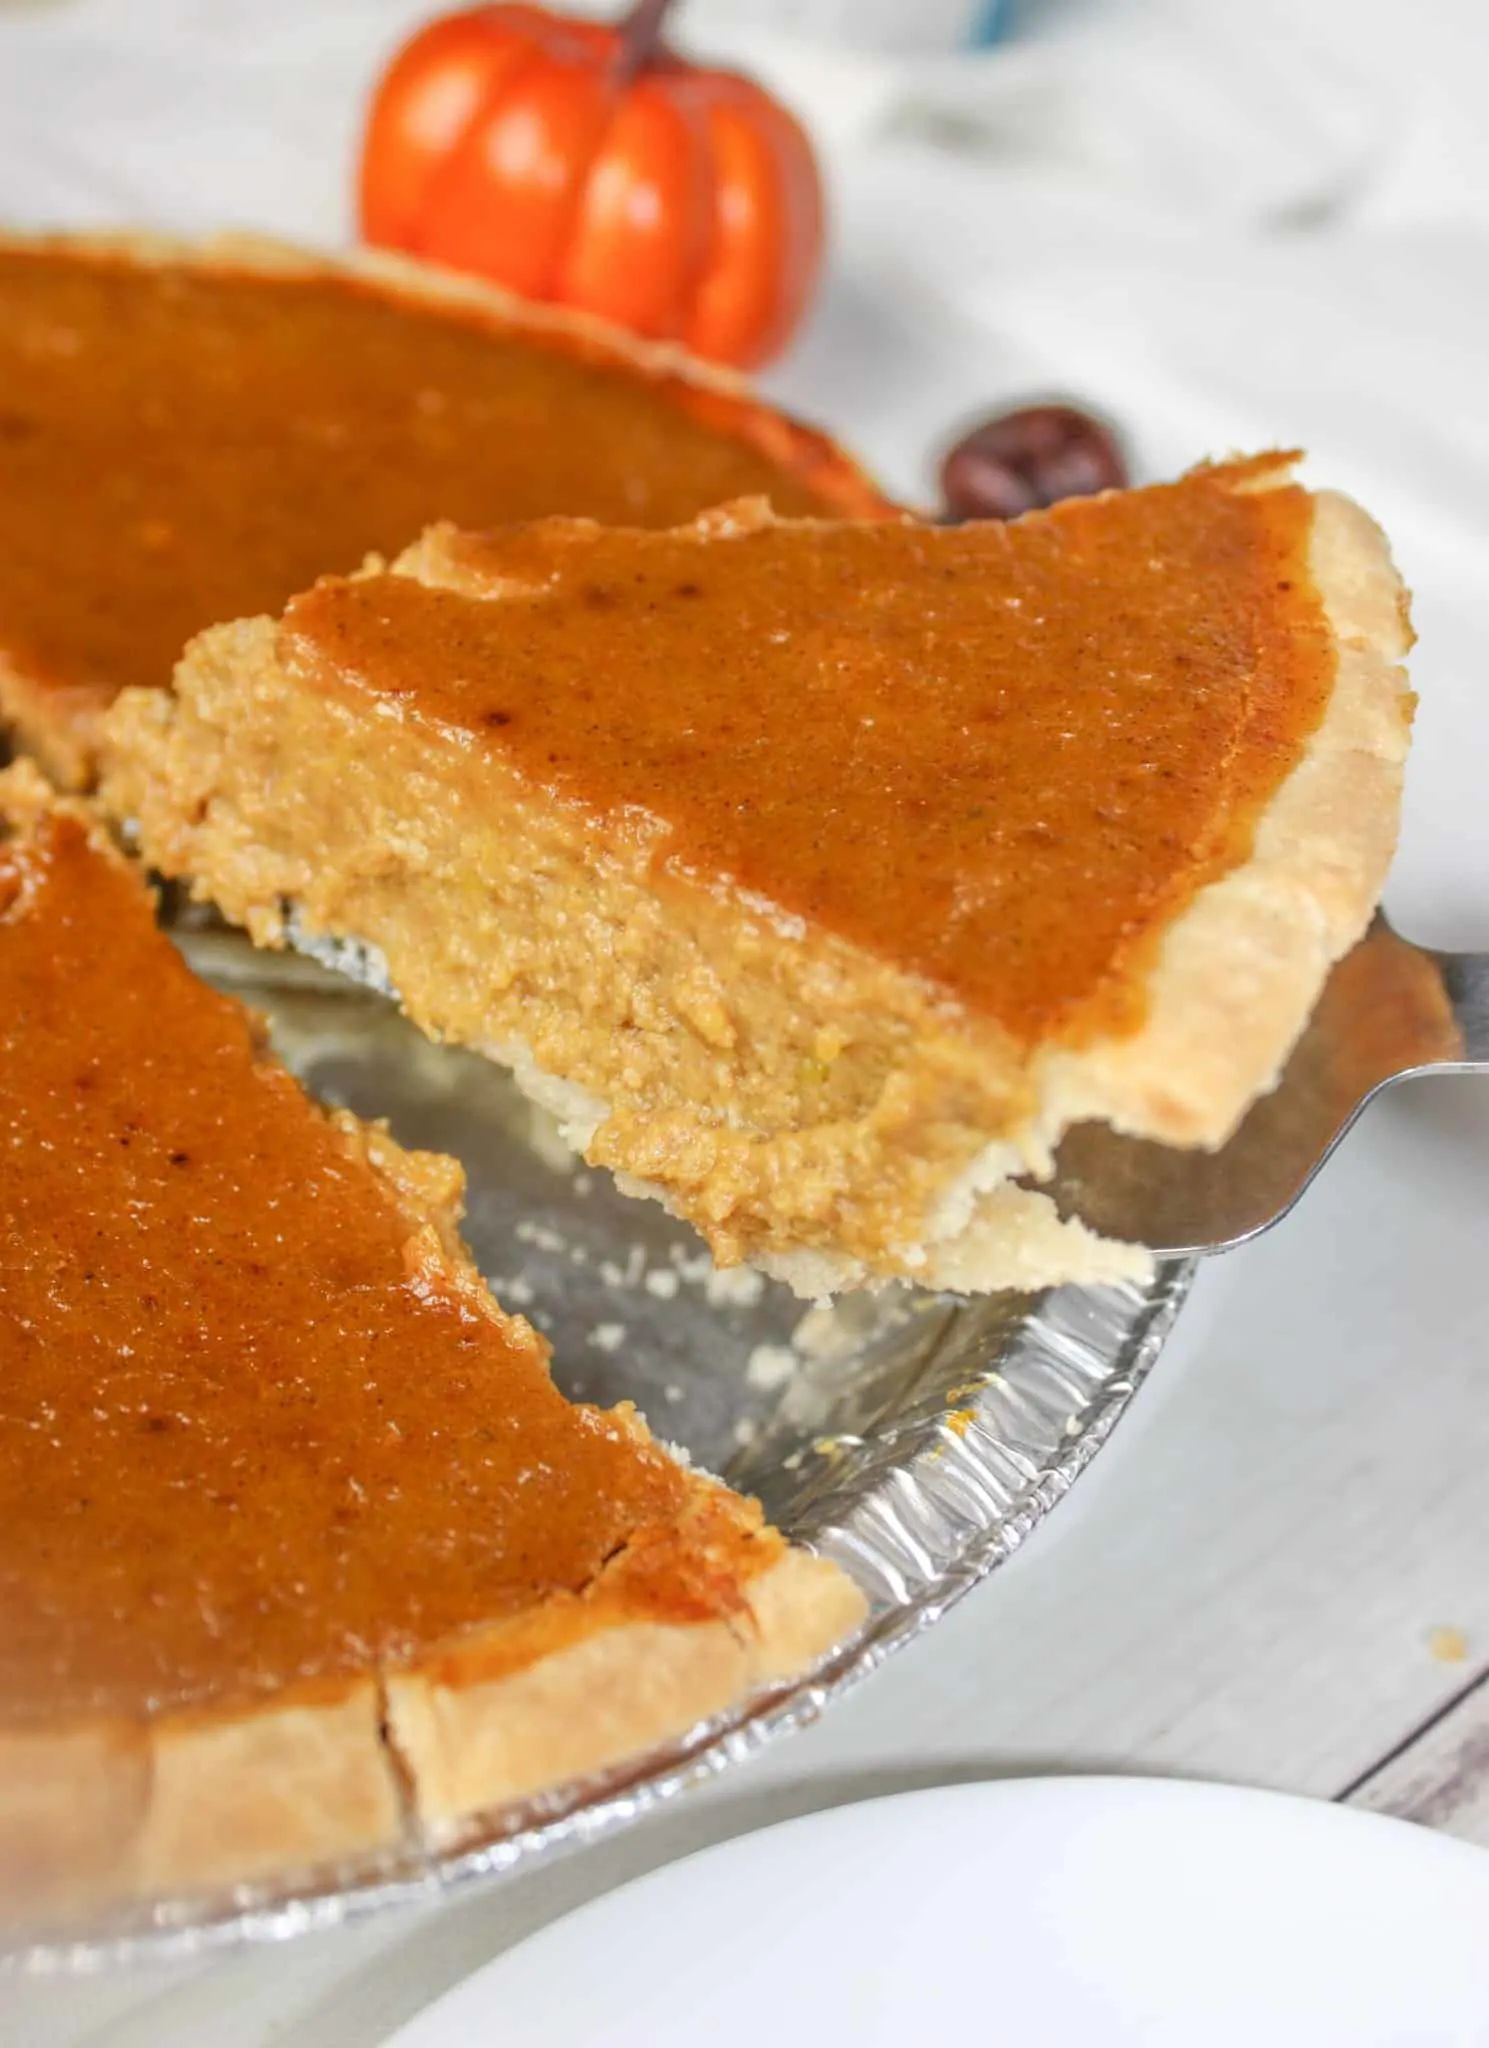 Thanksgiving would not be Thanksgiving without Pumpkin Pie.  This gluten free, dairy free version makes it possible for everyone to enjoy this traditional holiday dessert!